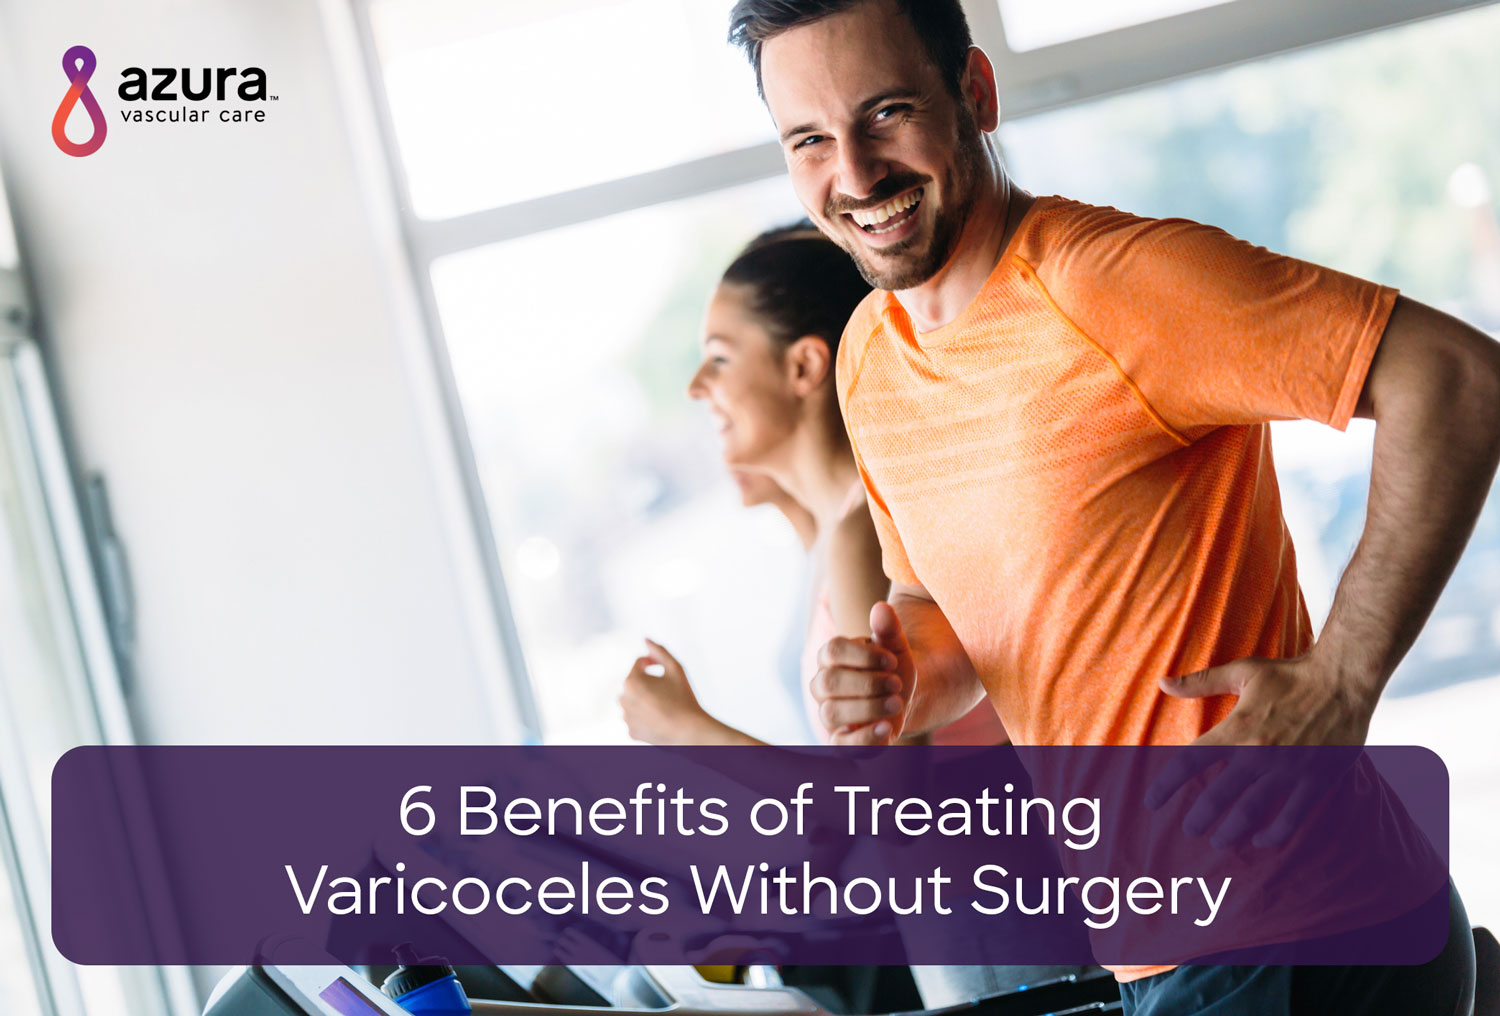 Treating Varicoceles Without Surgery